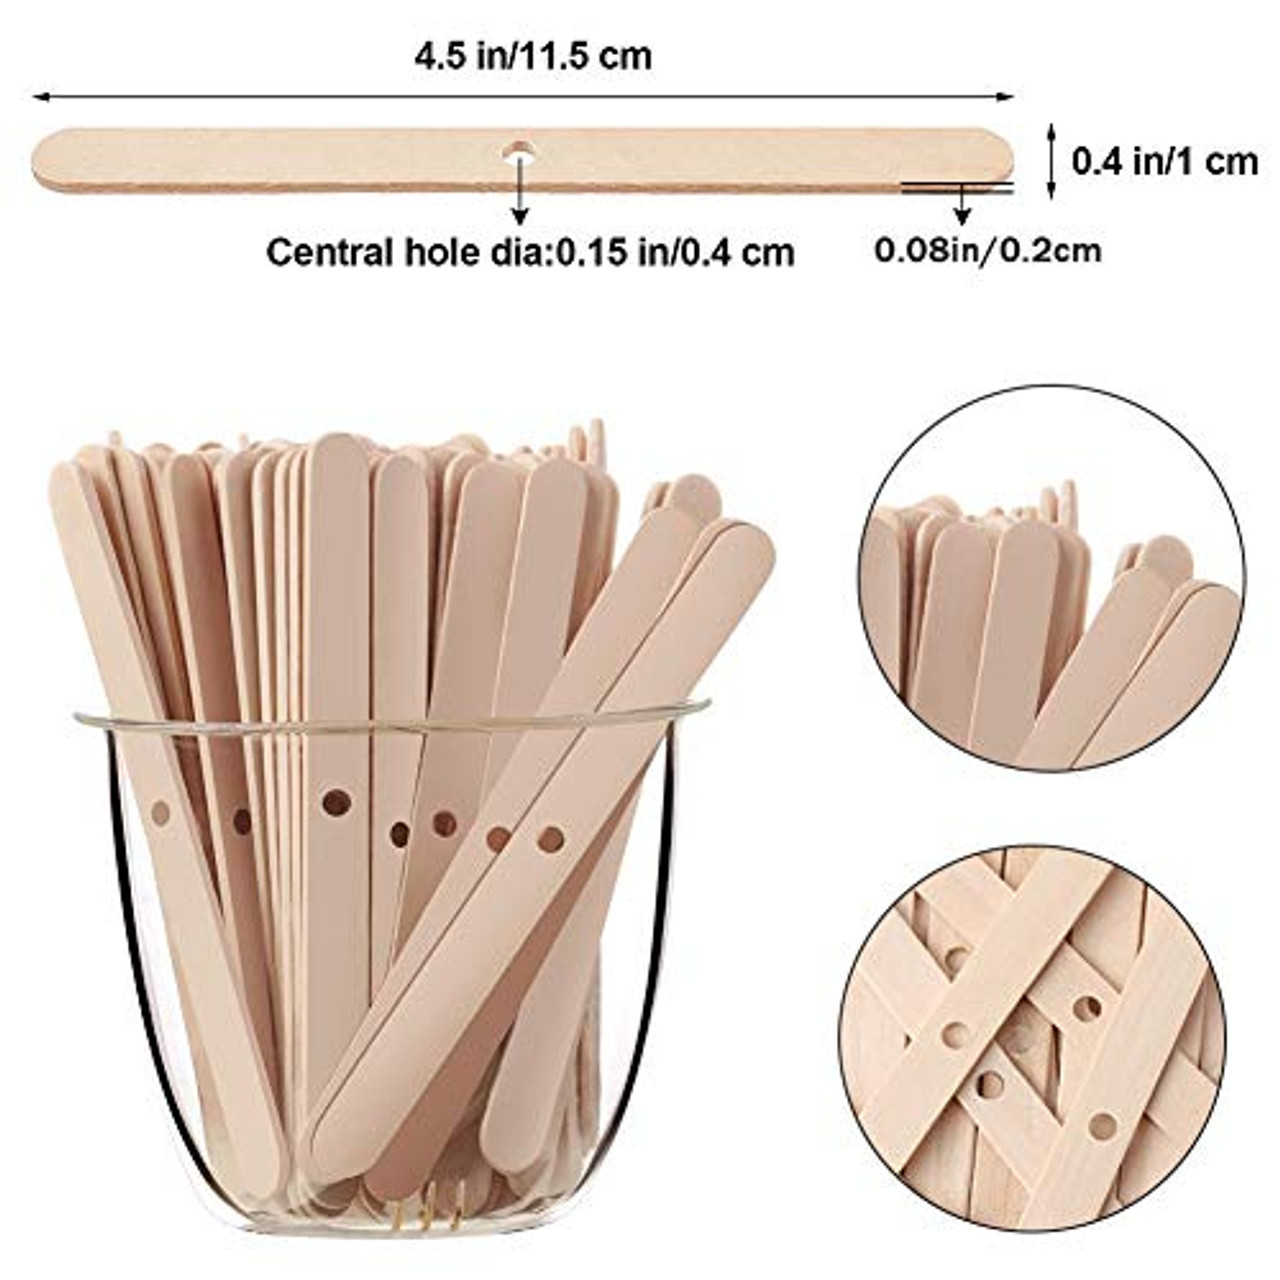 20pcs Wooden Candle Wick